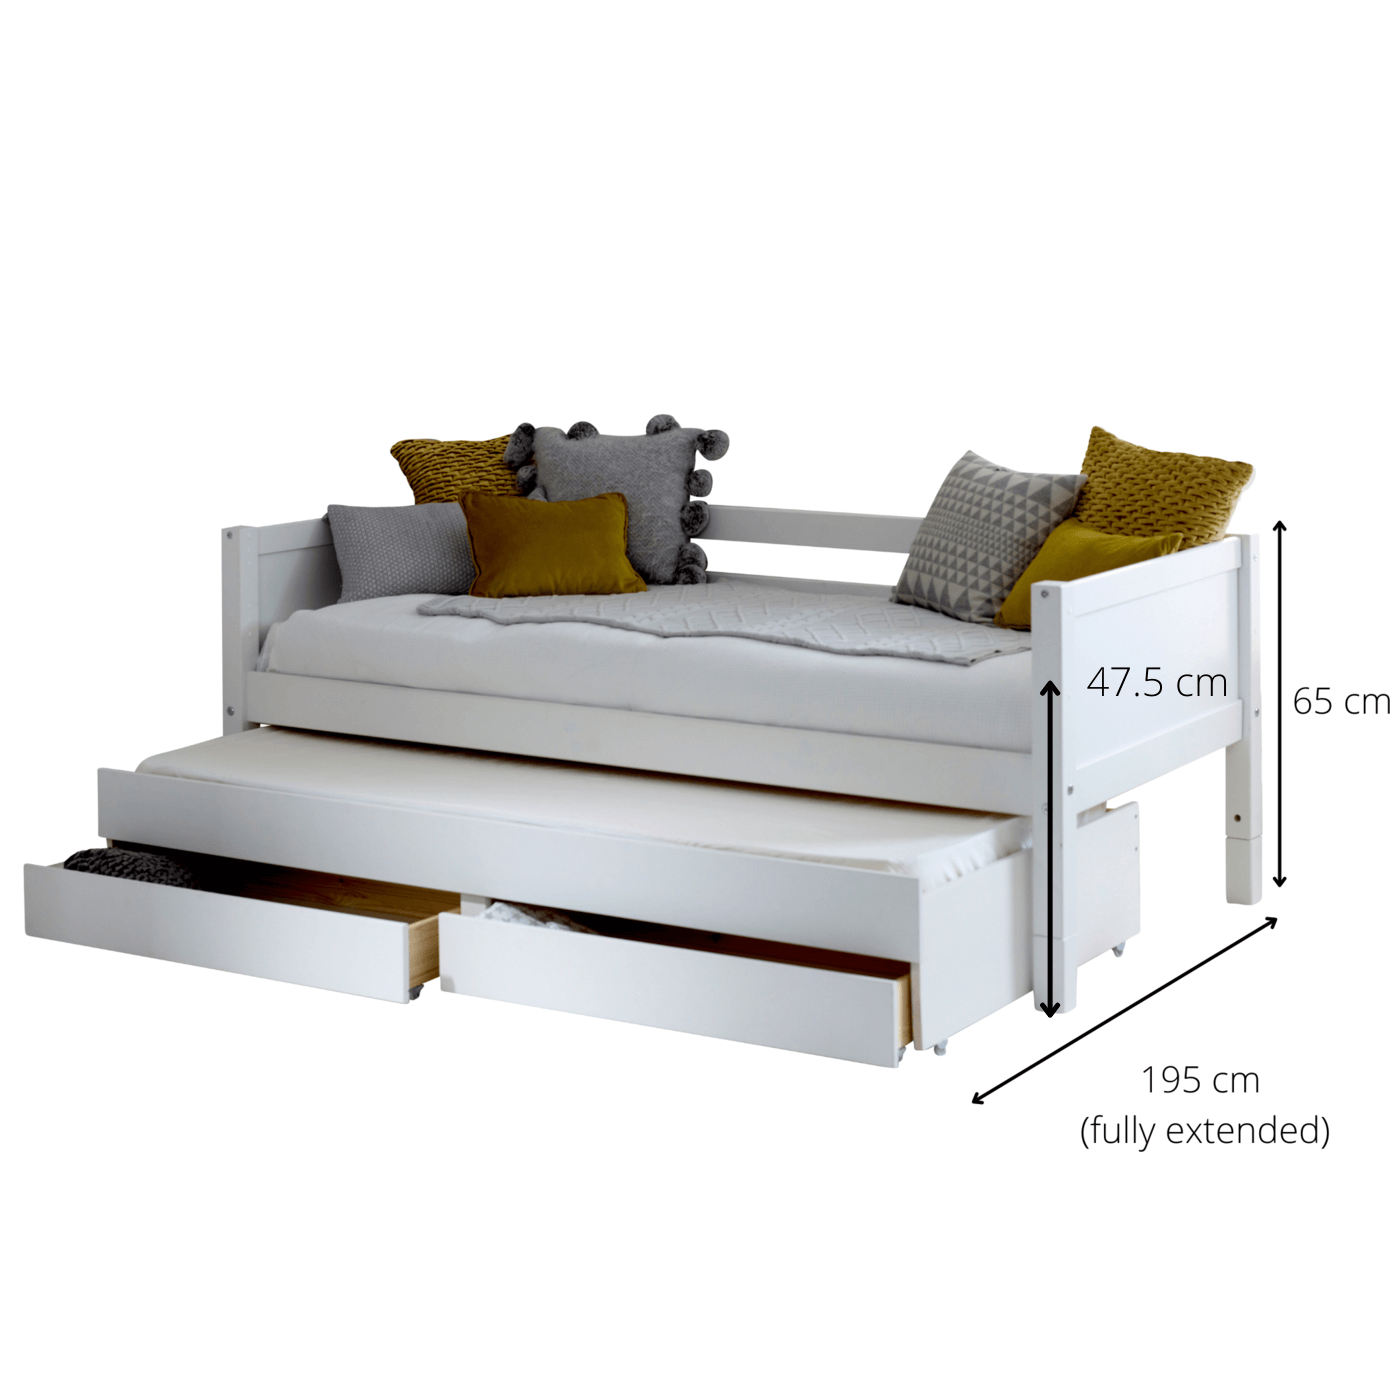 Kristina Nordic Daybed Dimensions